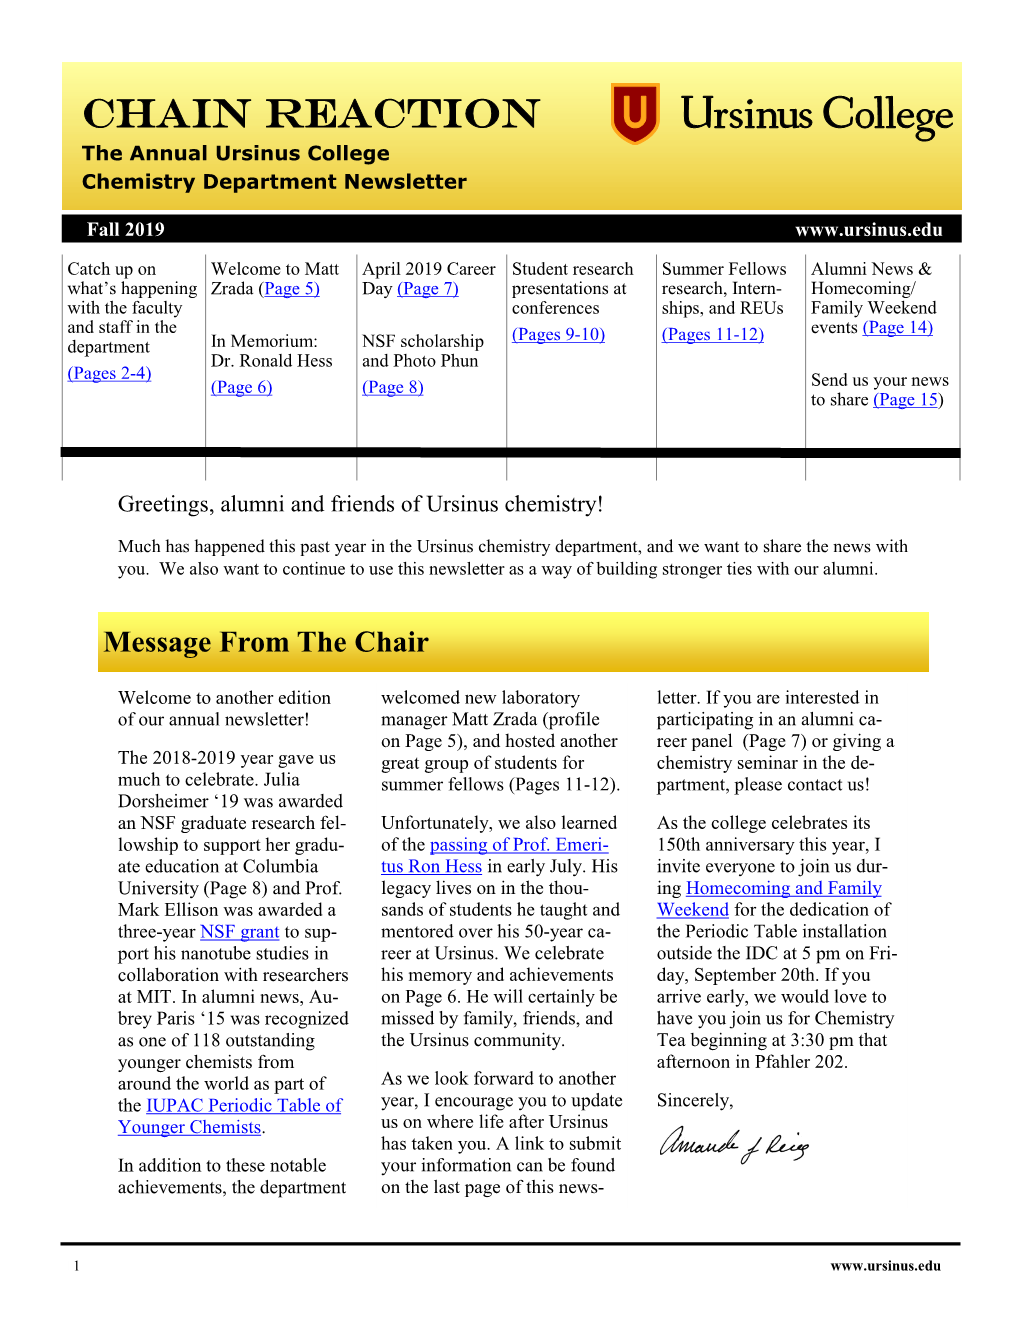 Chain Reaction the Annual Ursinus College Chemistry Department Newsletter